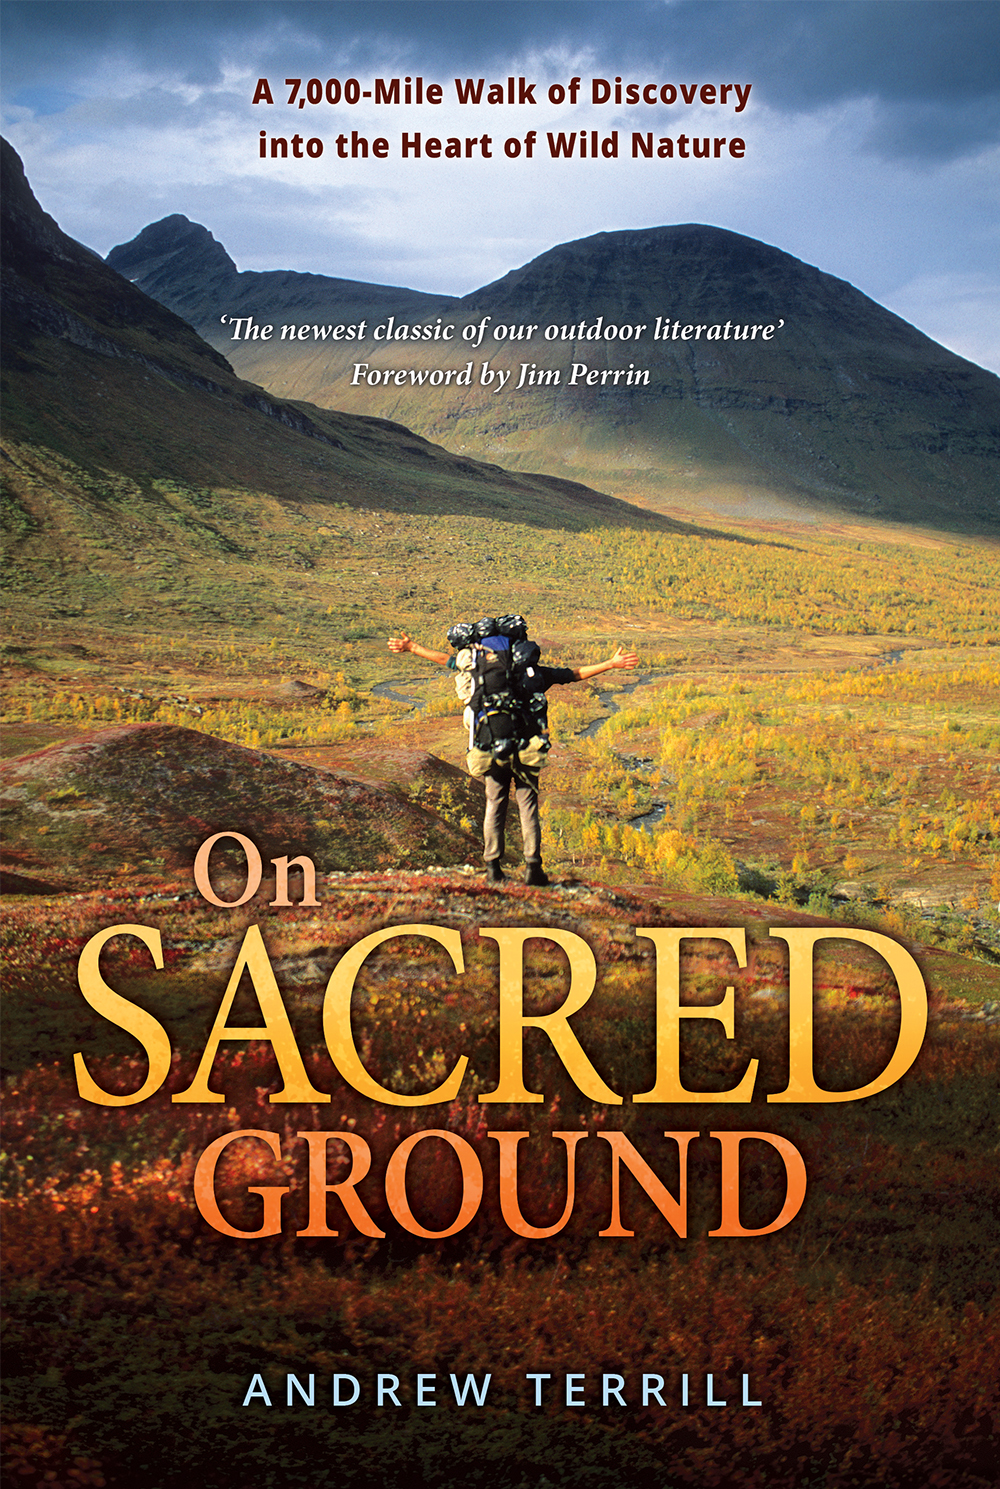 On Sacred Ground by Andrew Terrill: 7000 miles across Europe